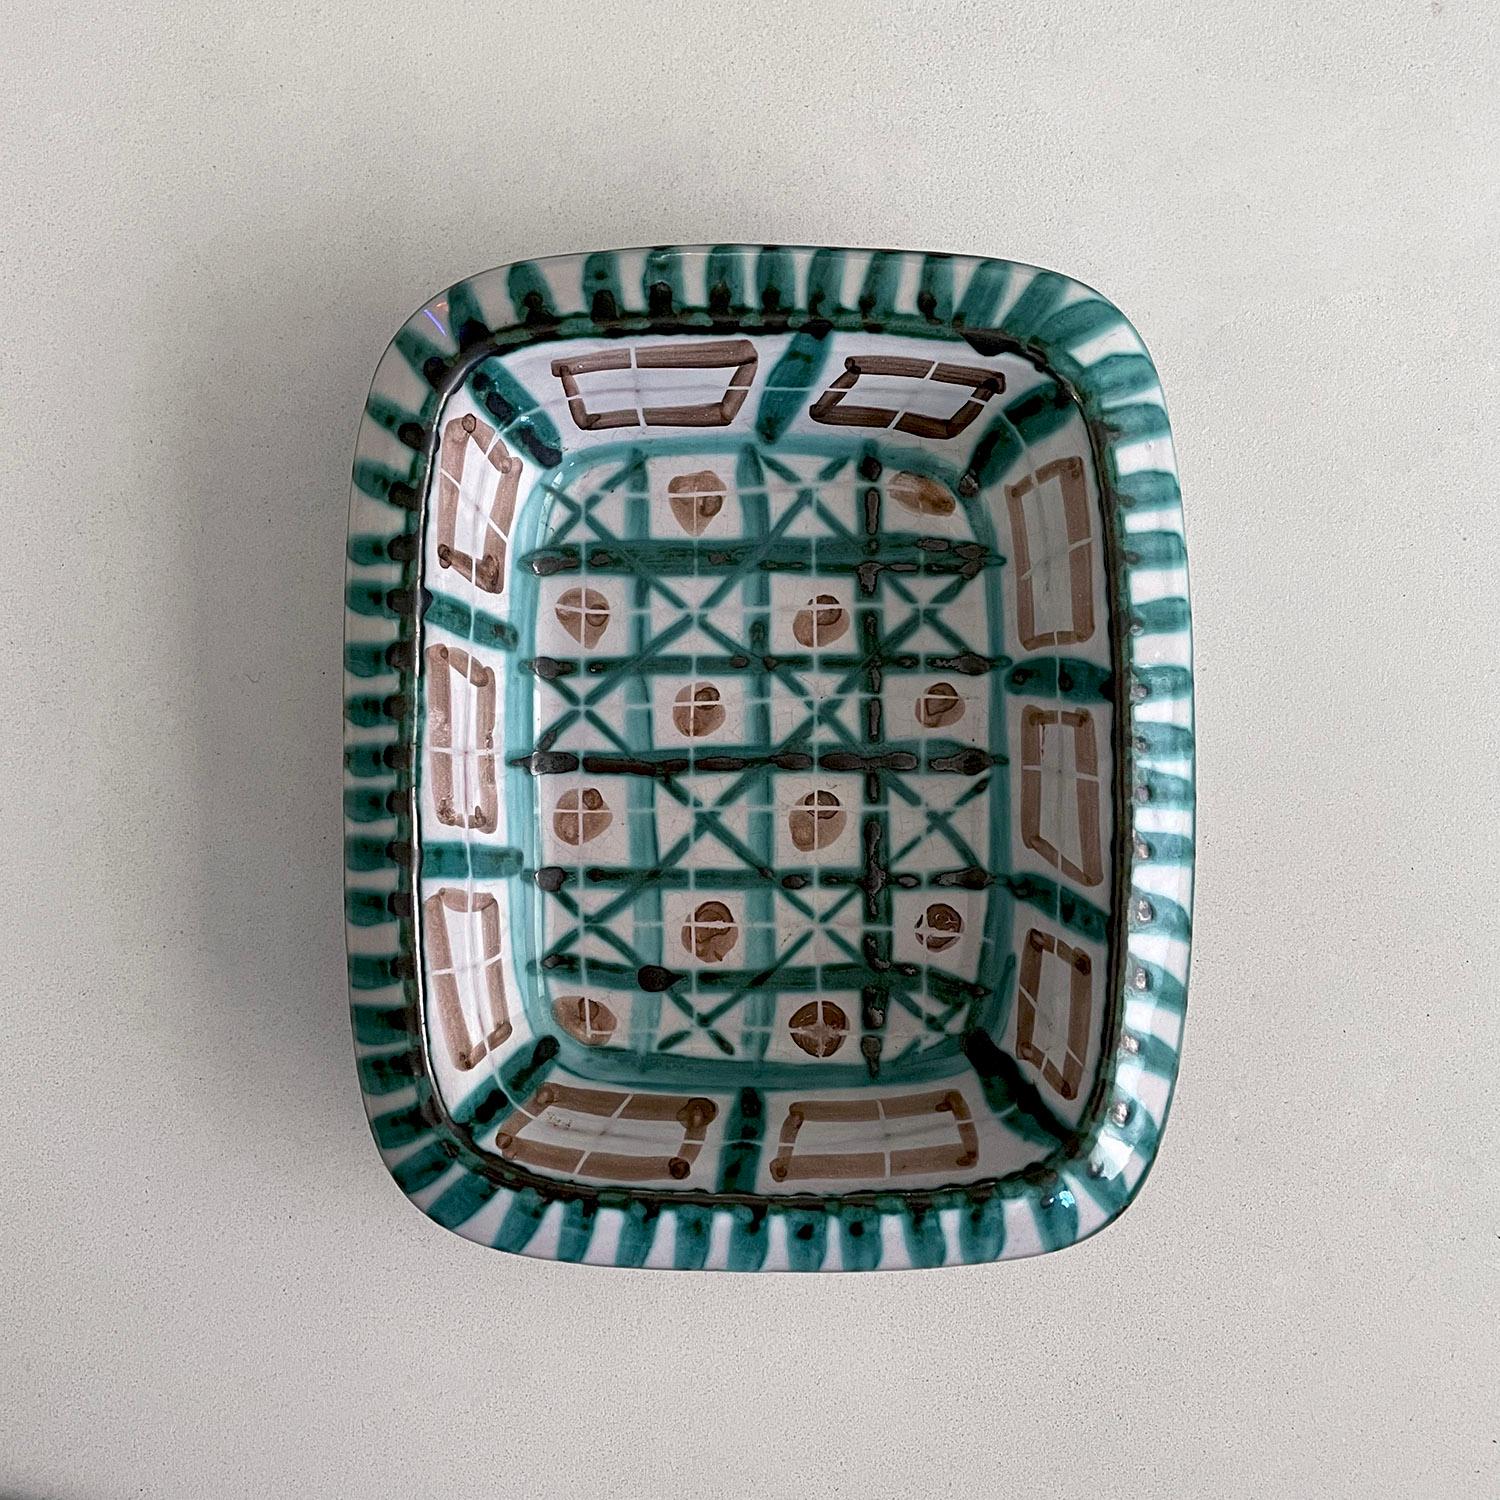 Robert Picault French ceramic vessel
France, circa 1950’s 
Can be used as an ashtray or catch all
Vibrant pattern, color, and design
No structural damage
Patina from age and use
Marked identification
Additional Robert Picault pieces are available,